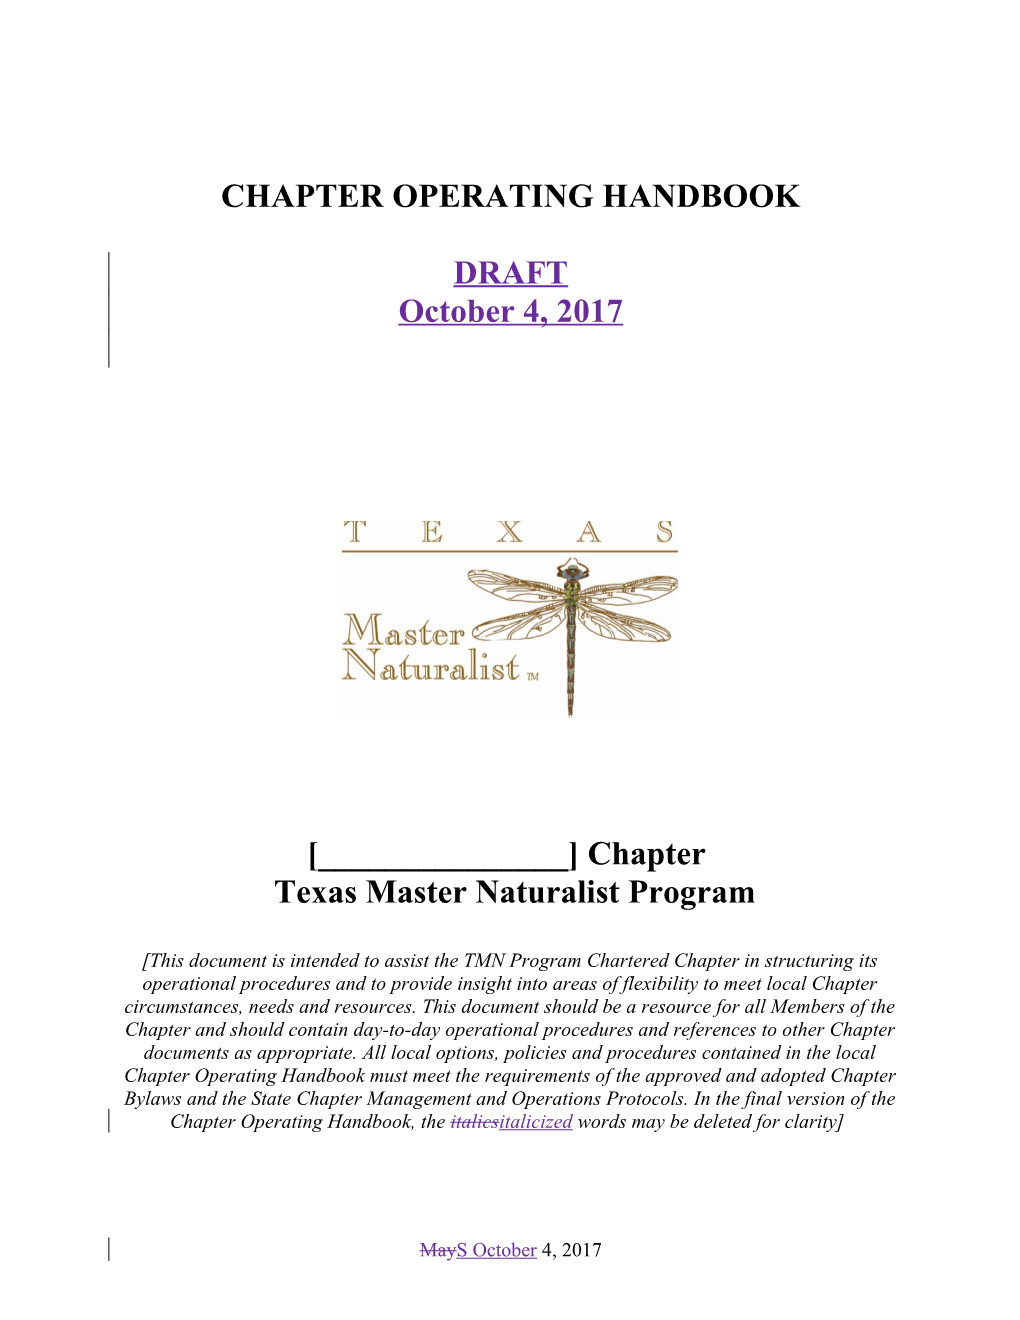 Bylaws of the ______ Chapter of the Texas Master Naturalist Program